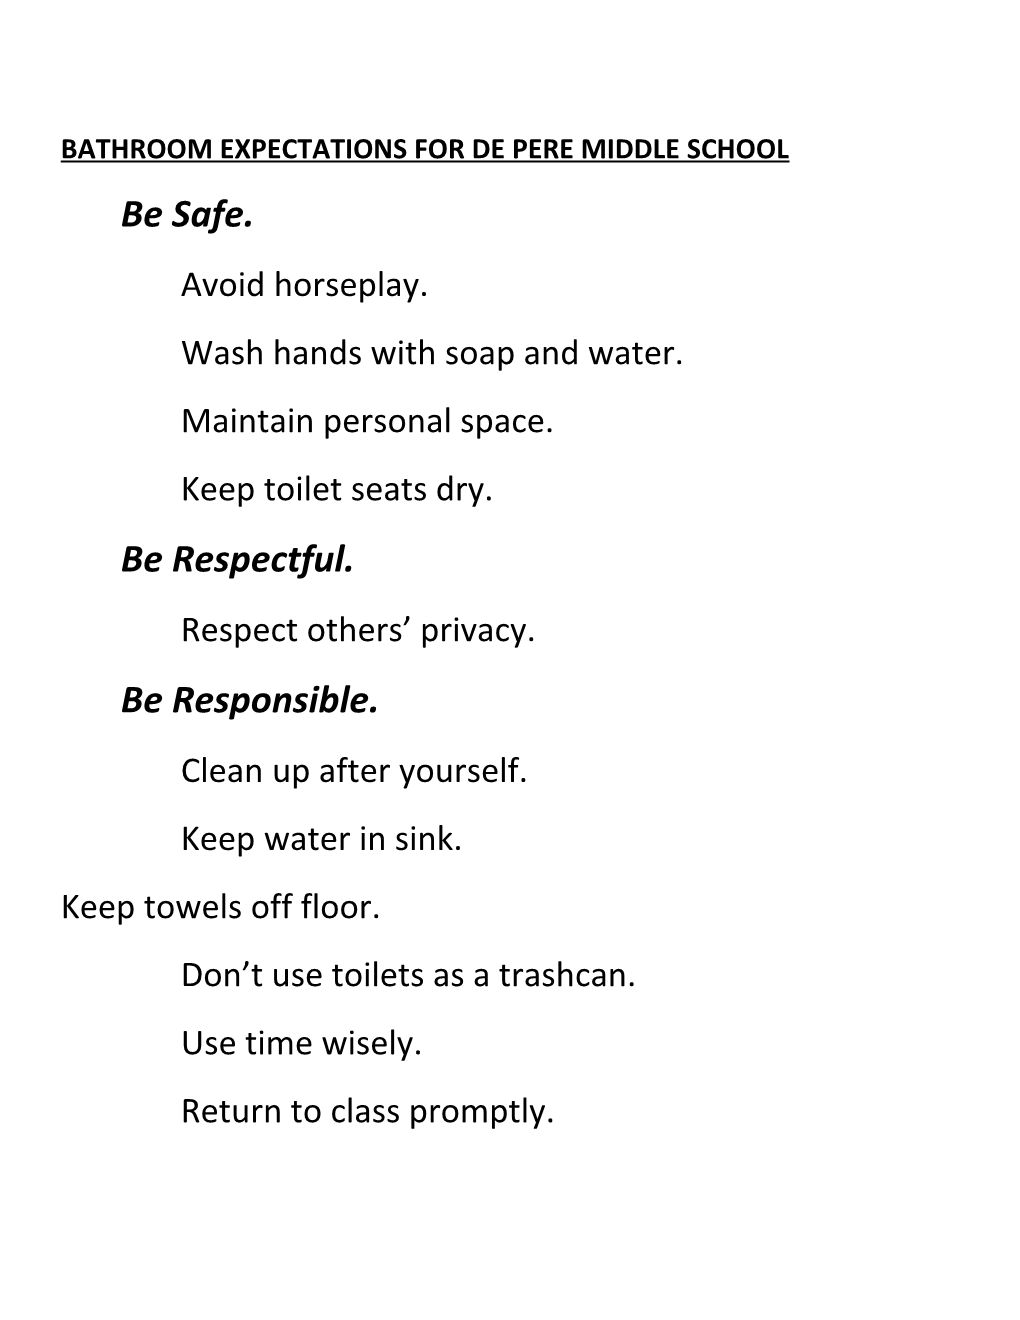 Bathroom Expectations for De Pere Middle School